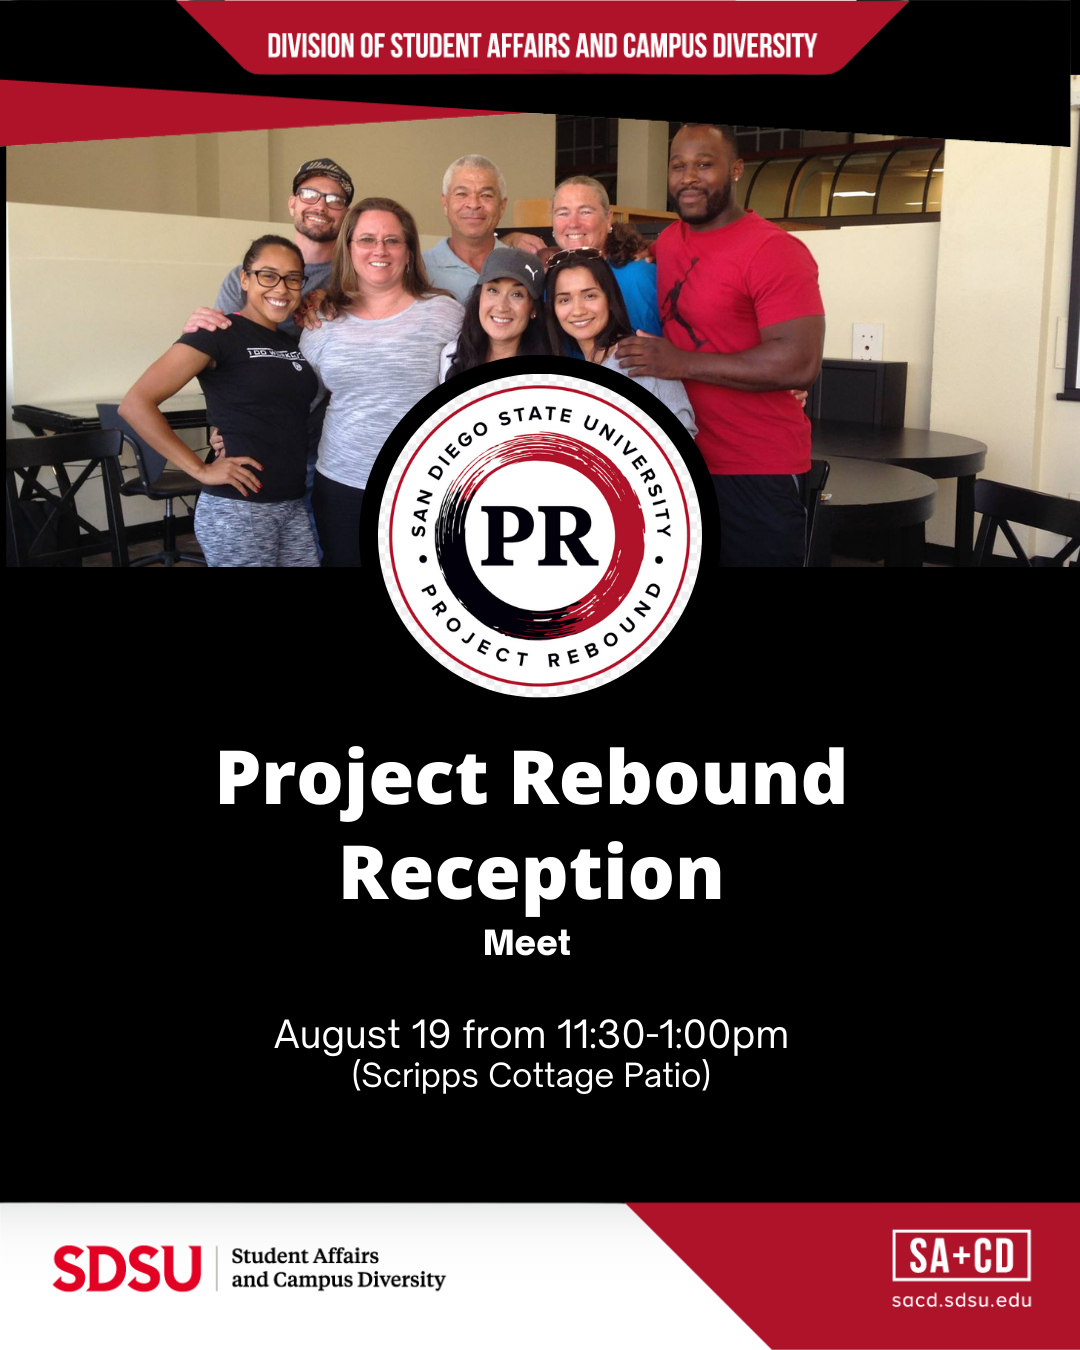 Project rebound reception Aug 19 at 11:30 a.m. - 1 p.m. at Scripps Cottage